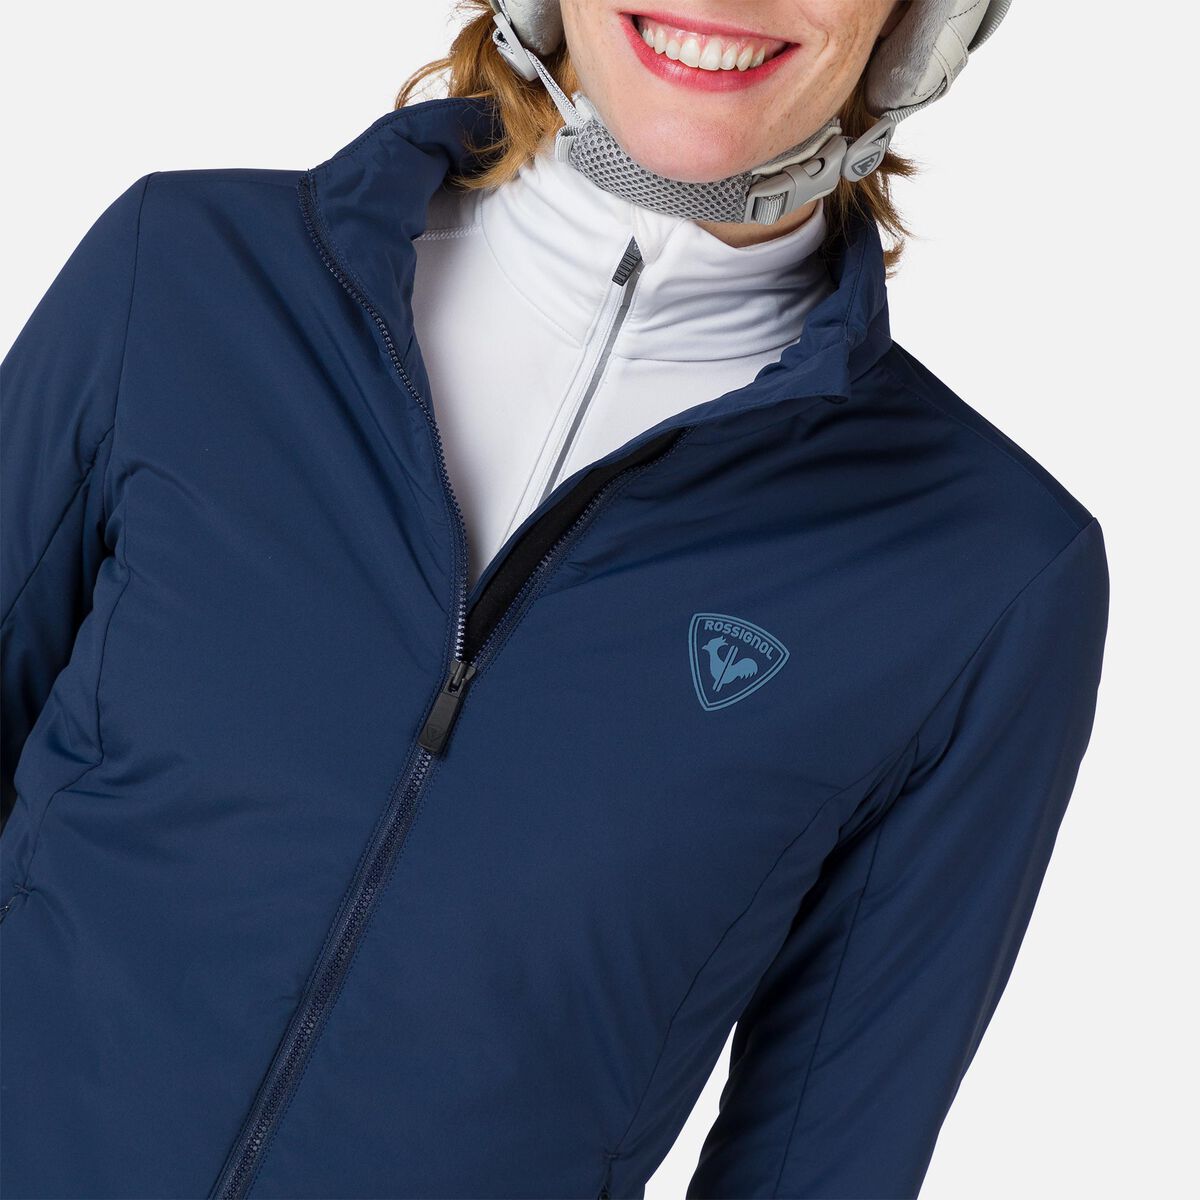 Rossignol Giacca donna Opside blue